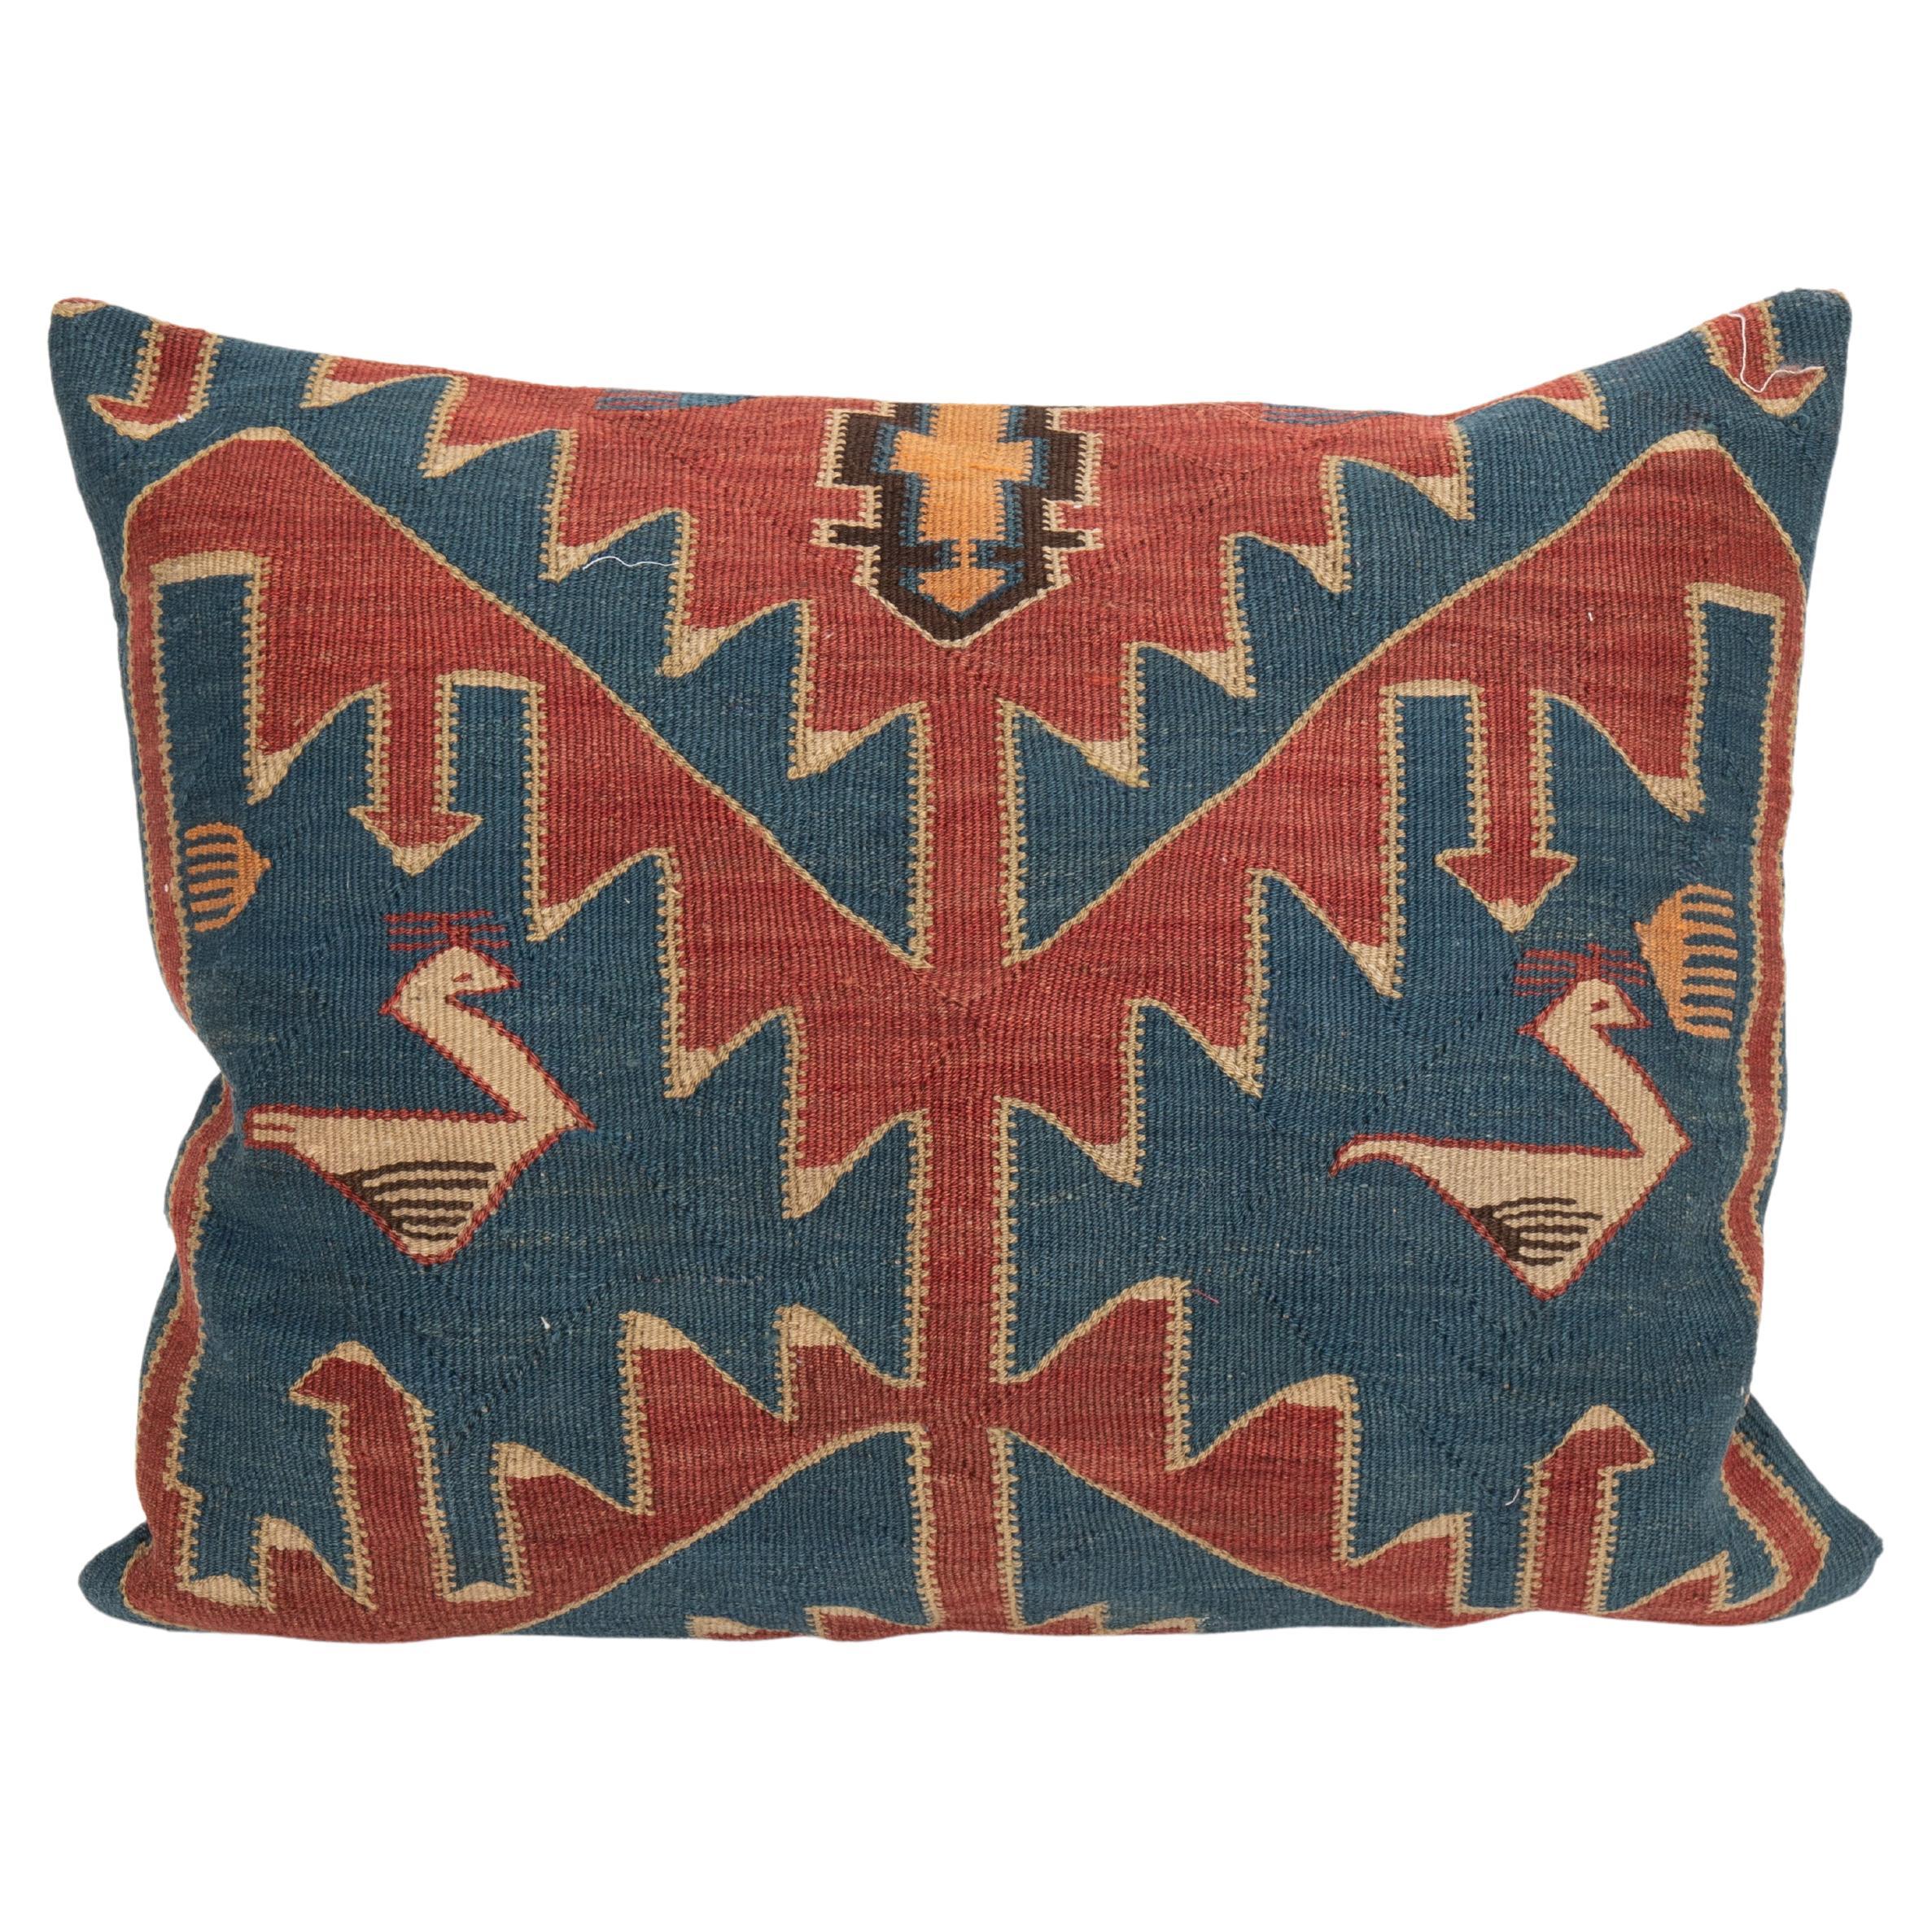  Floor Cushion Made from an Antique Avar Kilim from Dagestan , Early 20th C. For Sale